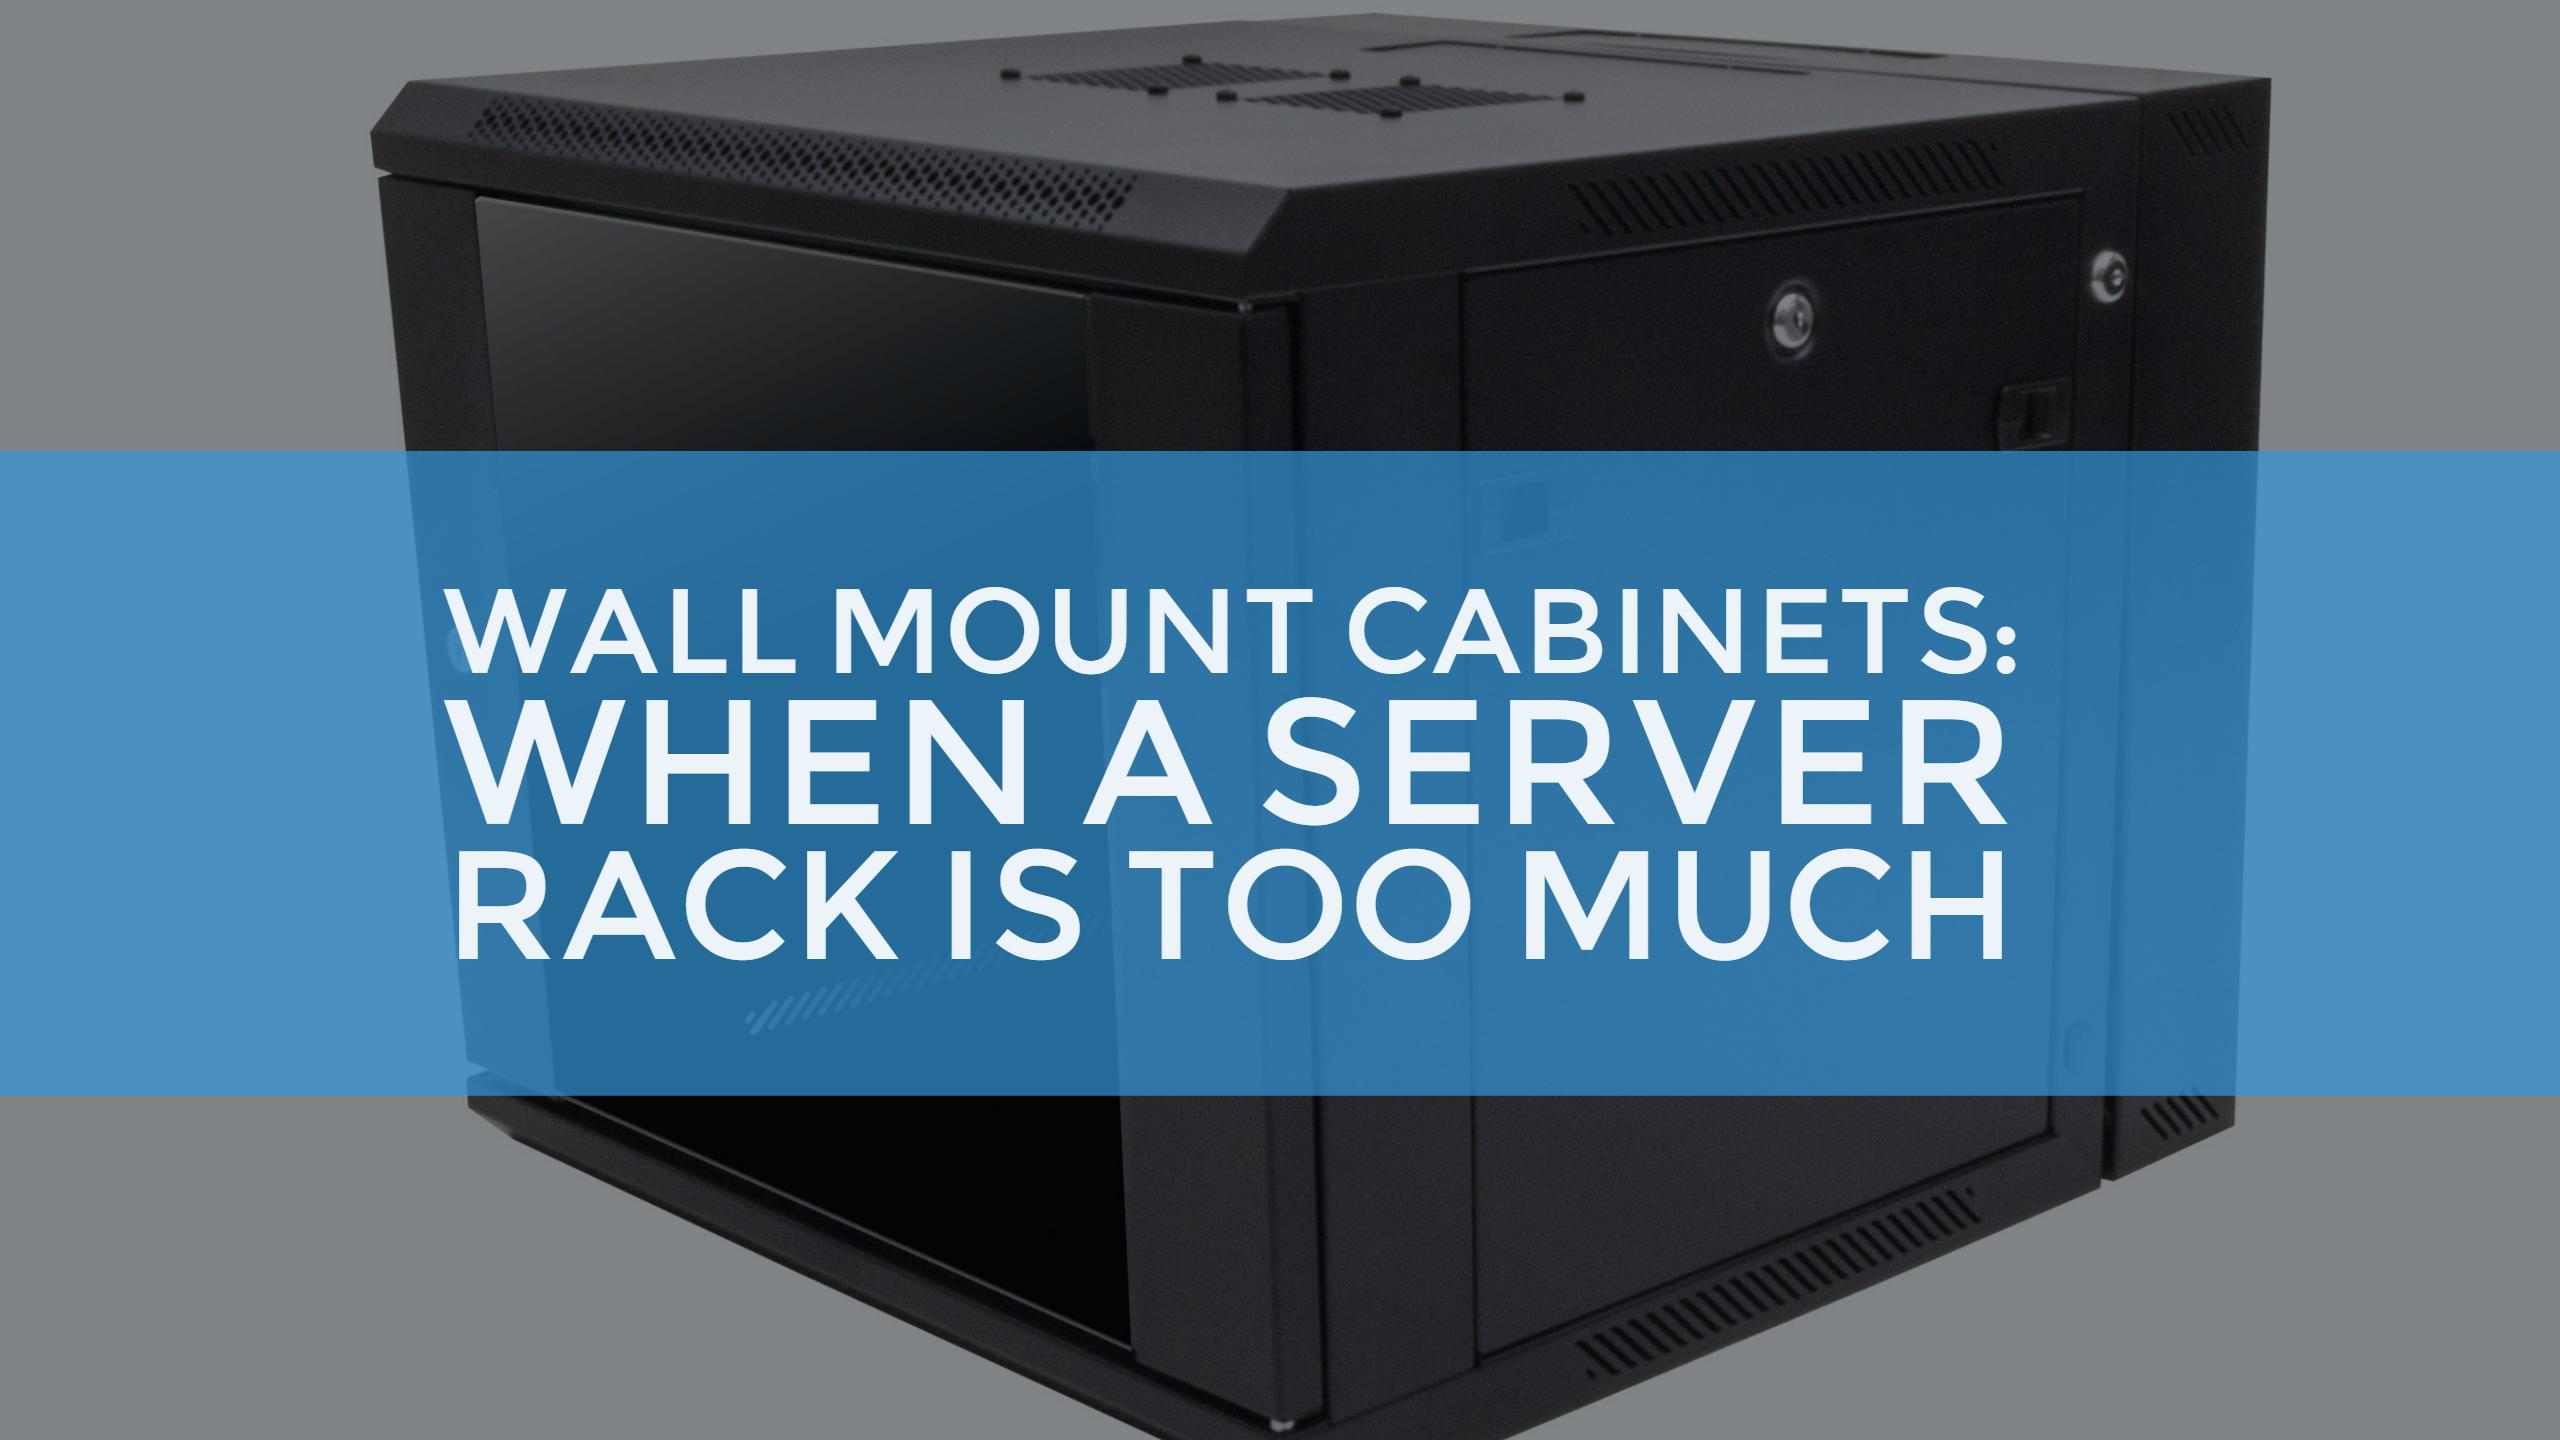 Wall Mount Cabinets: When a Server Rack is Too Much | RackSolutions